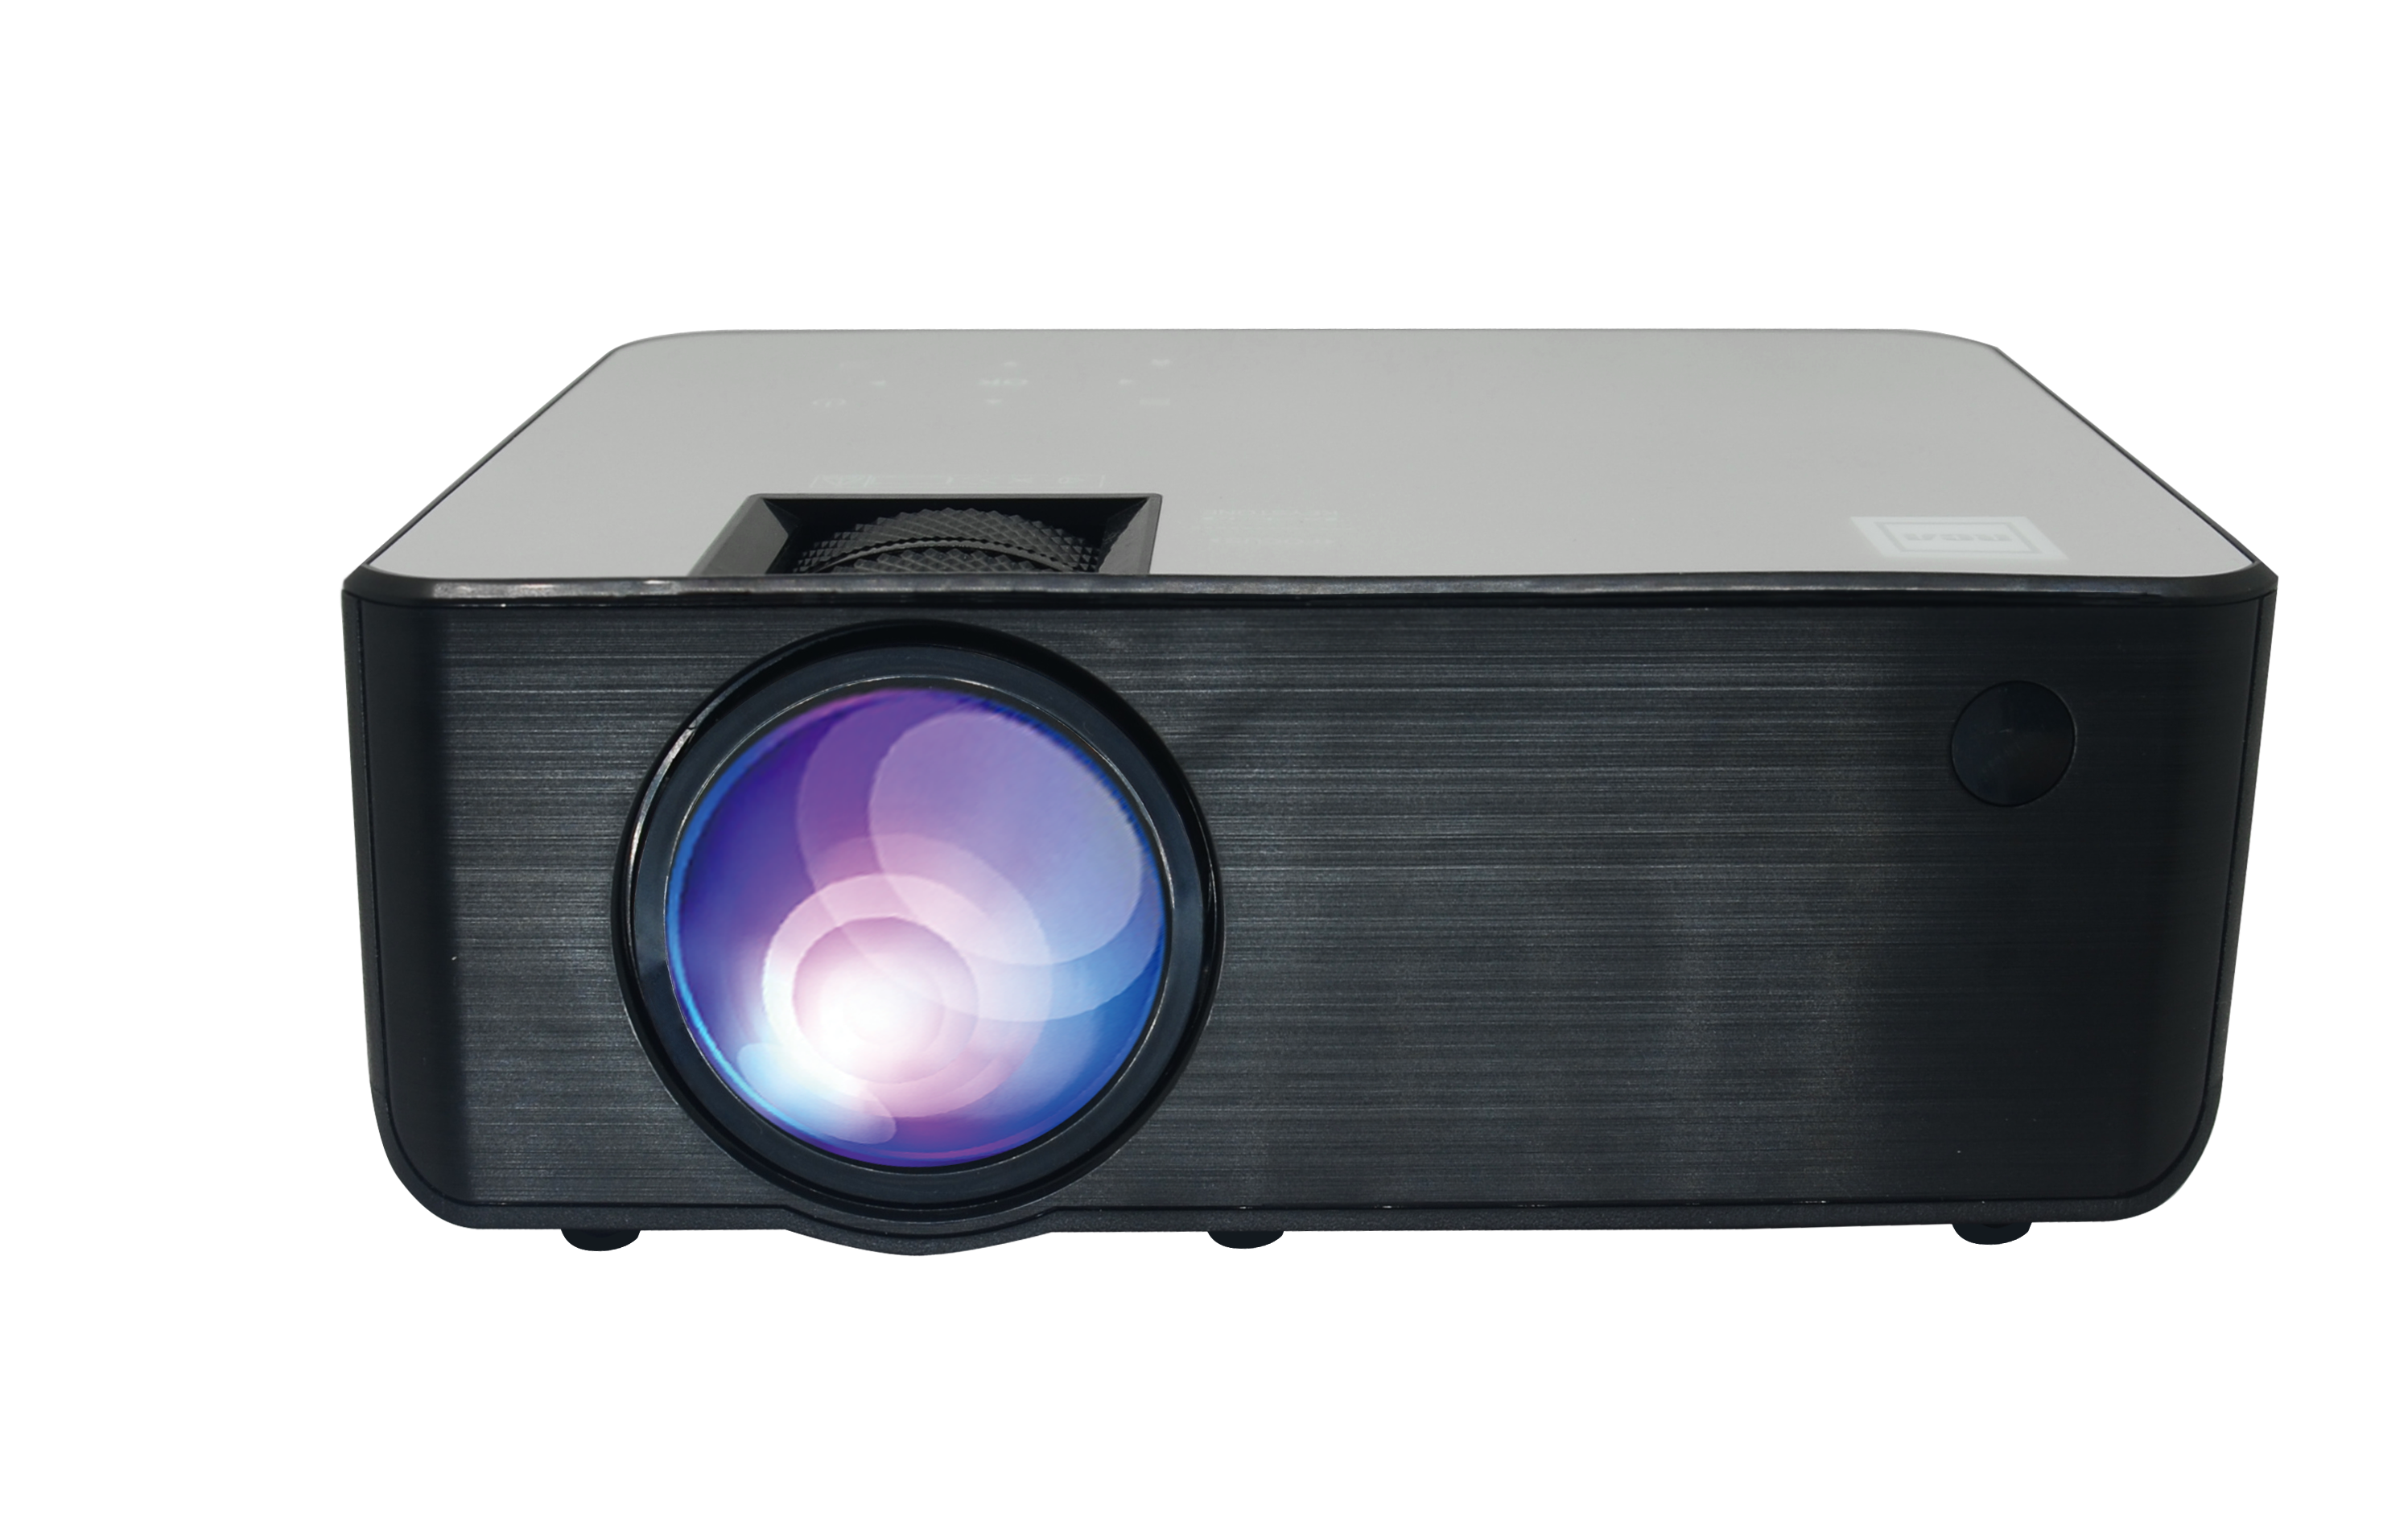 RCA 720p Home Theater Projector (includes Roku Streaming Stick)(RPJ133)